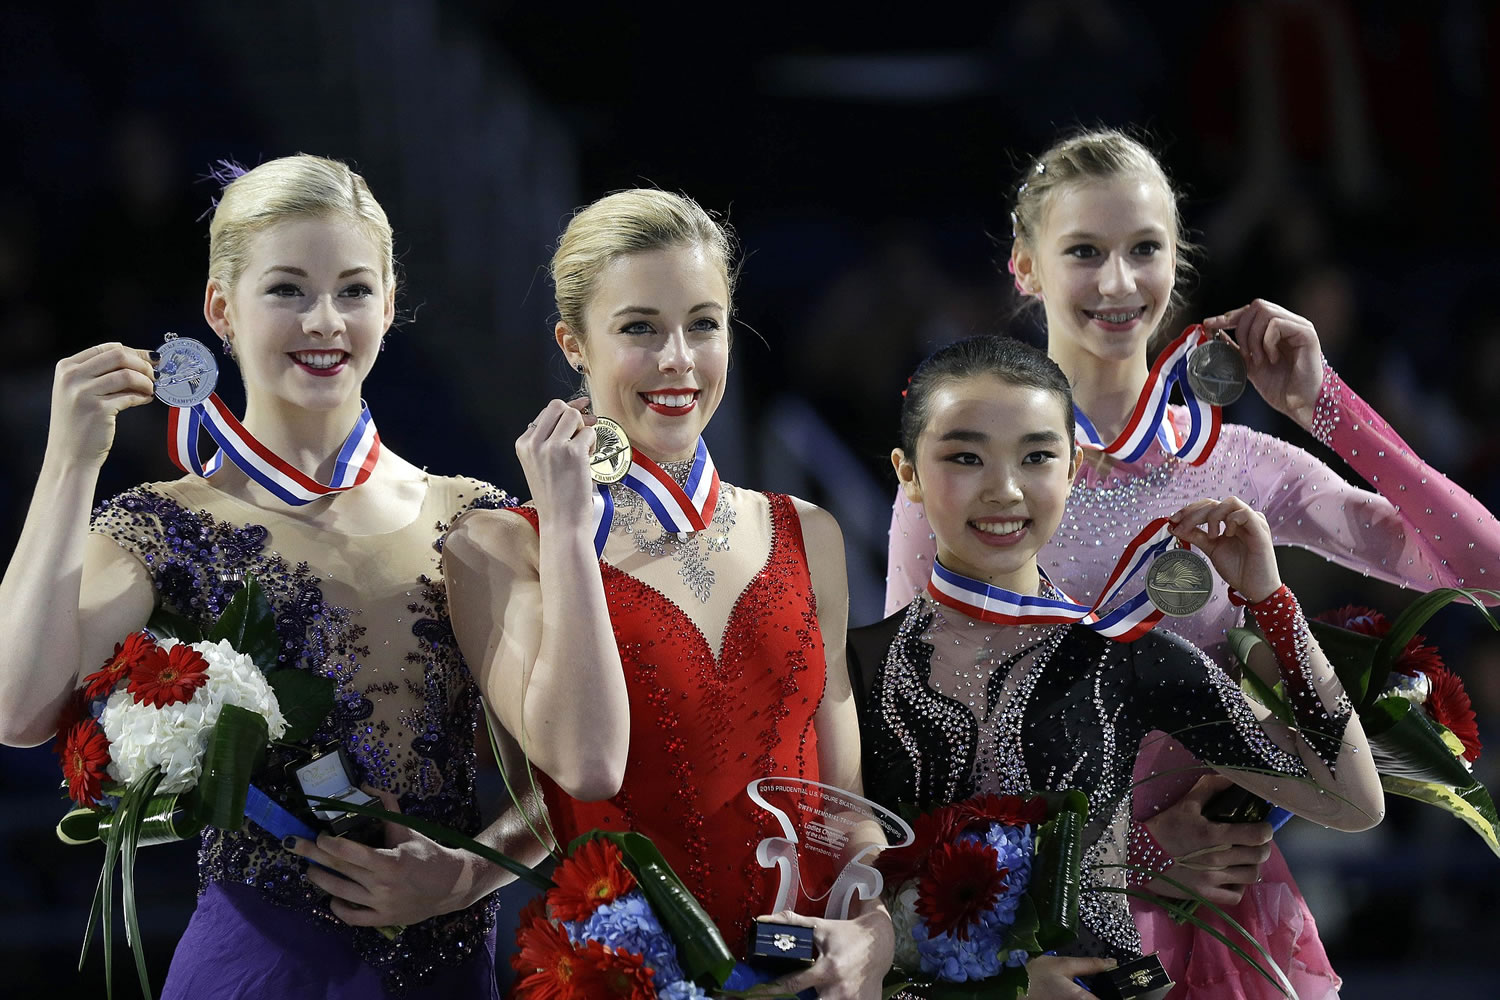 The top finishers of the women's competition, from left, Gracie Gold, second place; Ashley Wagner, first place; Karen Chen, third place; and Polina Edmunds, fourth place, hold their medals during the women's awards ceremony in the U.S. Figure Skating Championships in Greensboro, N.C., Saturday, Jan. 24, 2015.